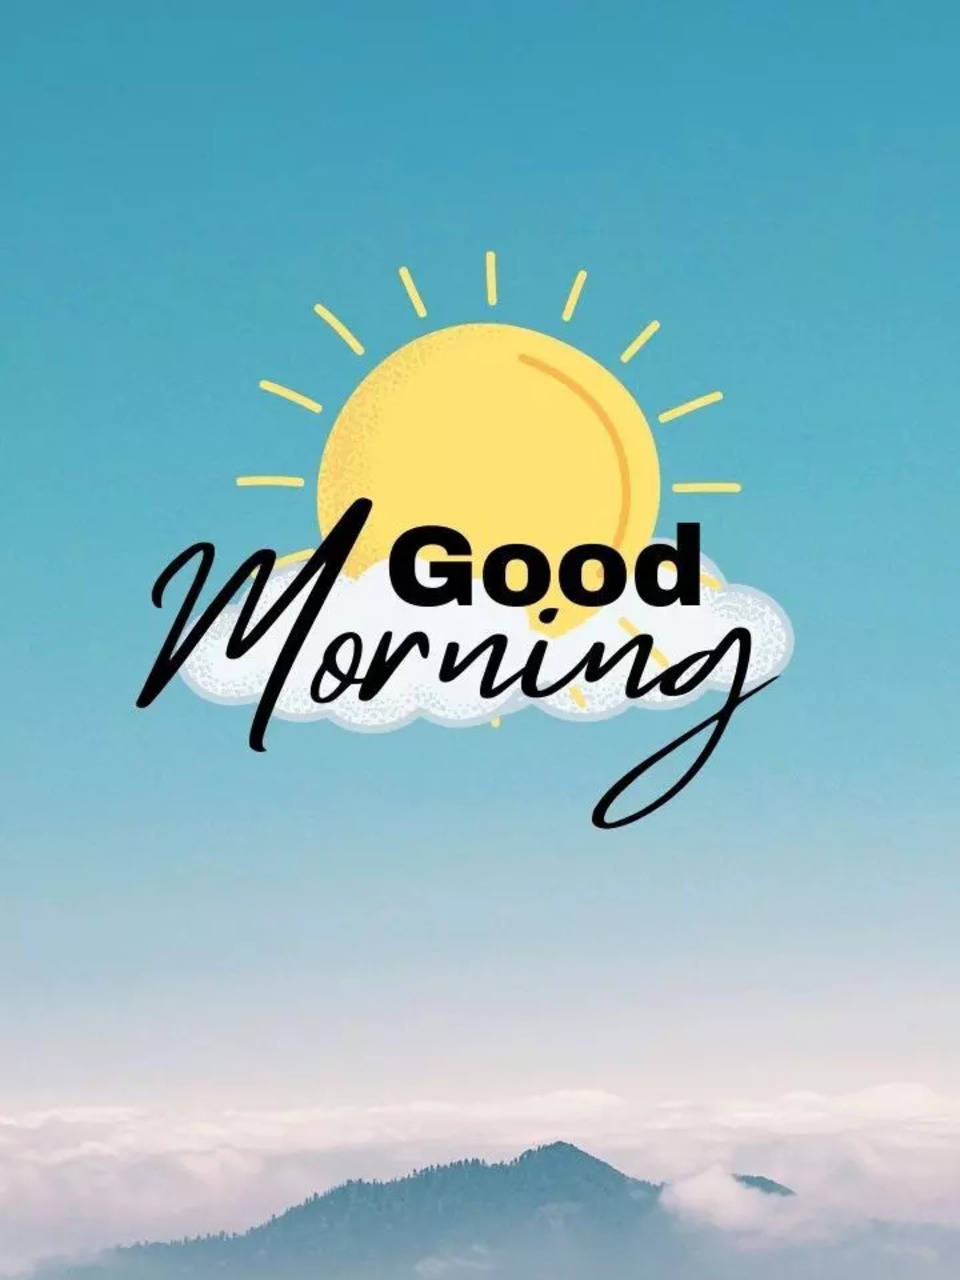 Happy Tuesday! Good Morning messages and greetings | Times Now